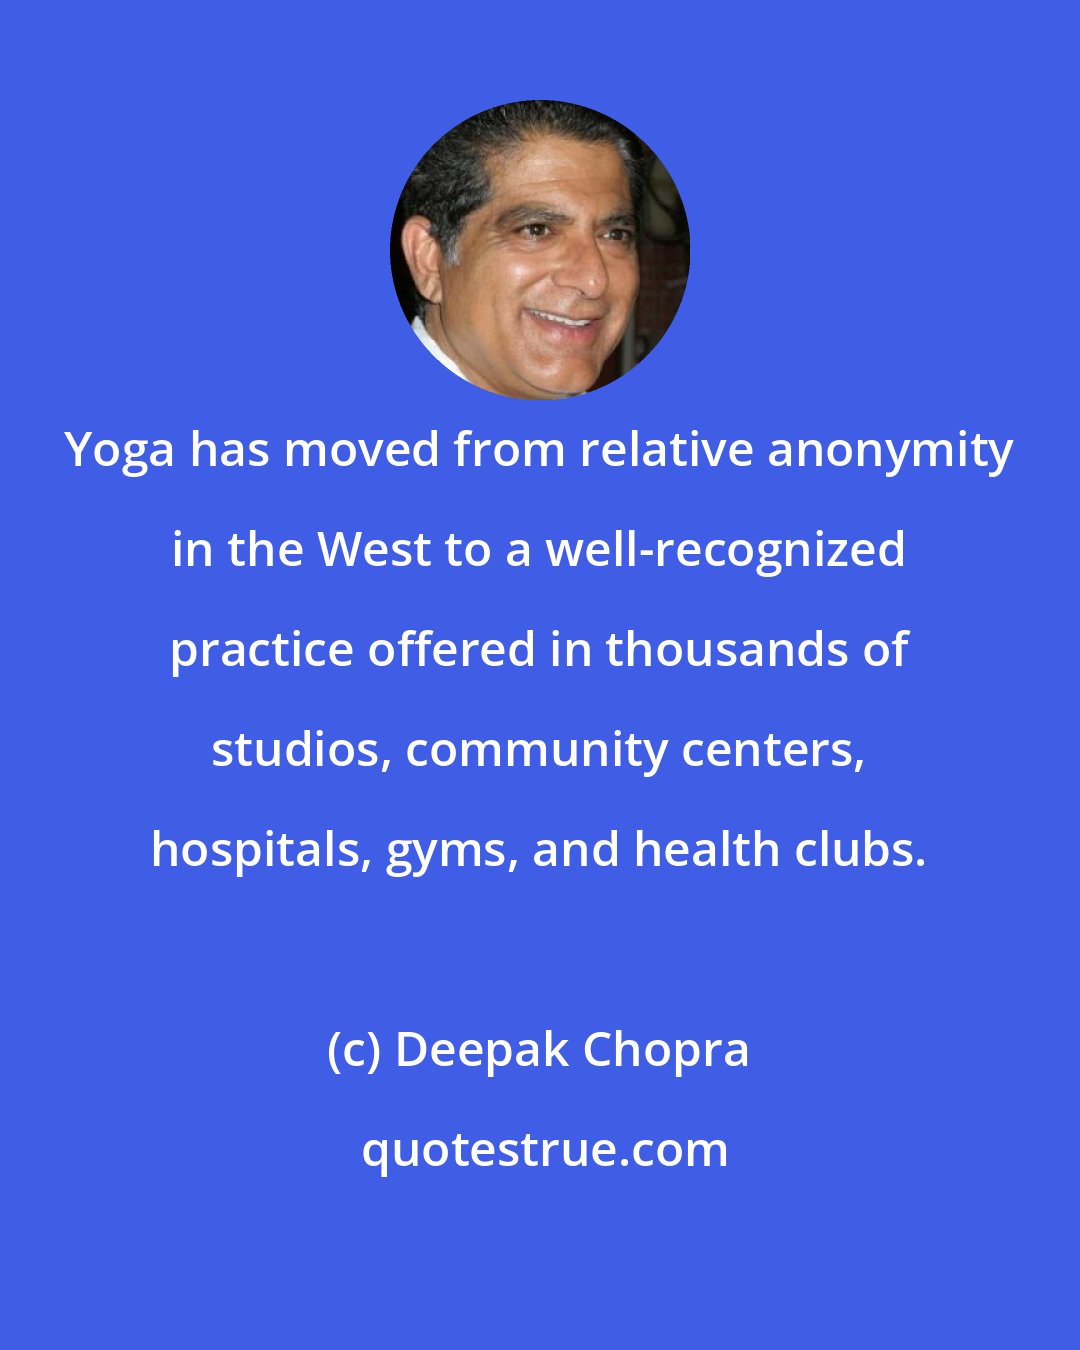 Deepak Chopra: Yoga has moved from relative anonymity in the West to a well-recognized practice offered in thousands of studios, community centers, hospitals, gyms, and health clubs.